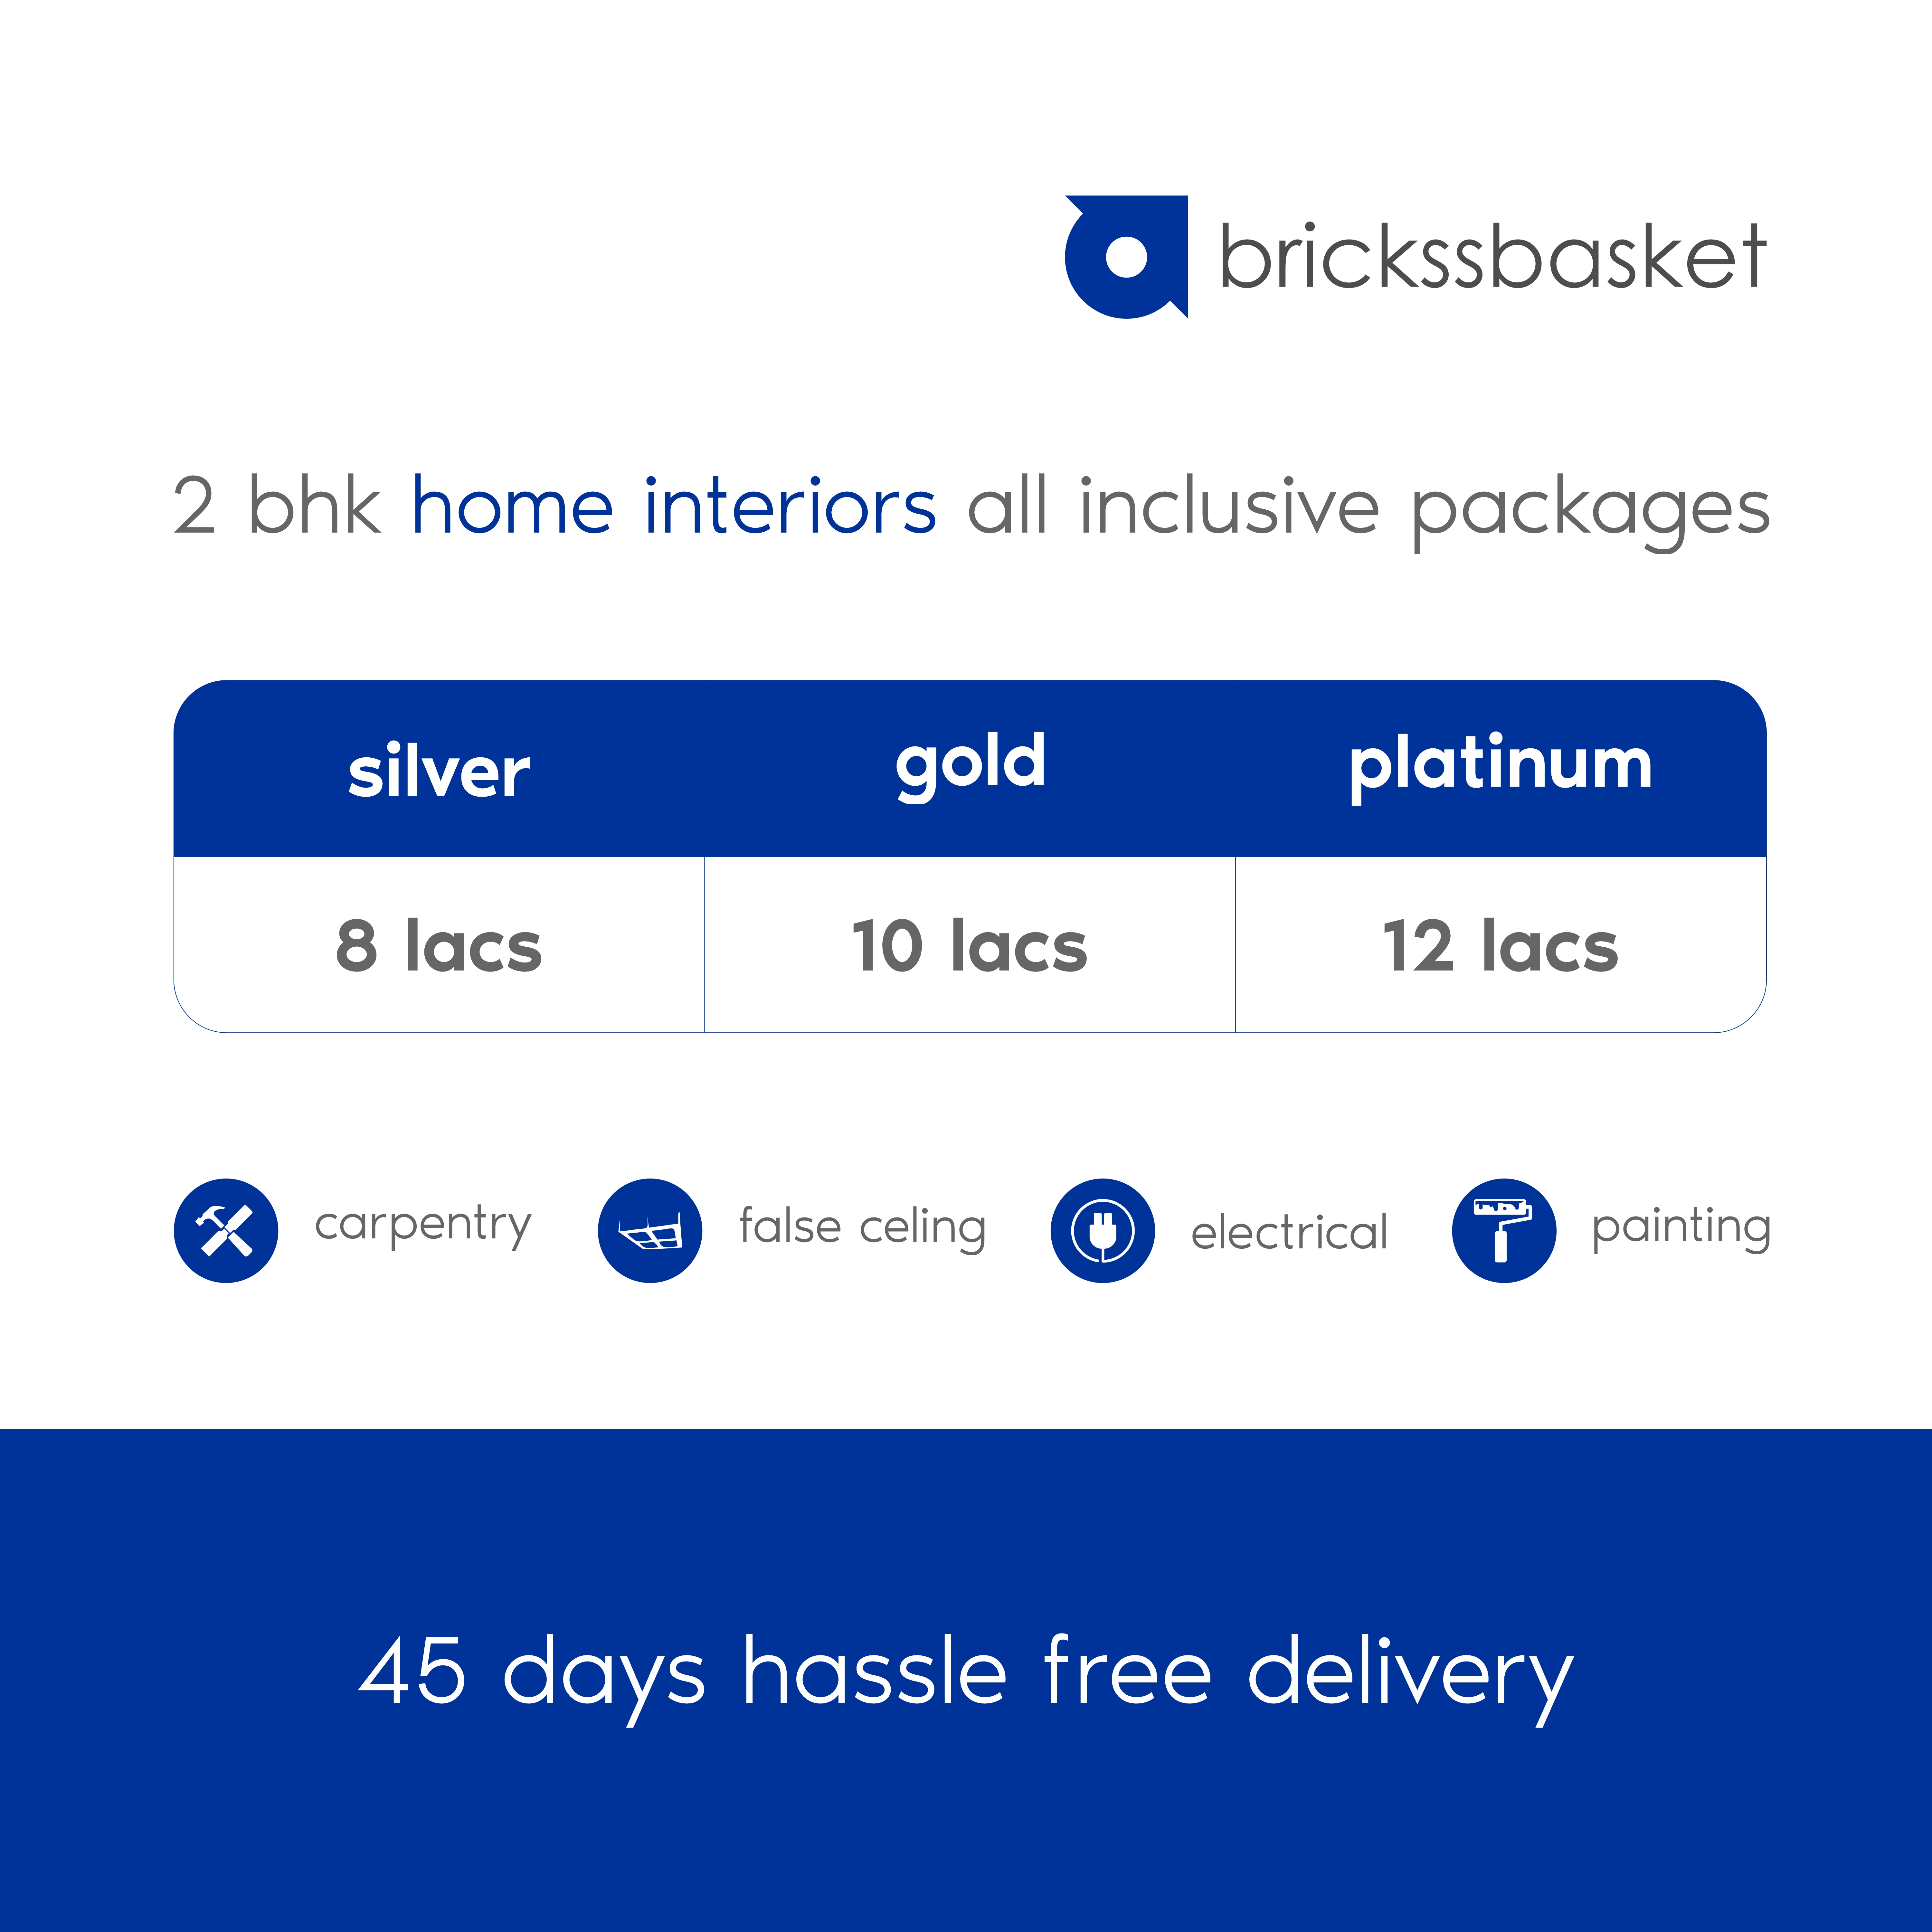 2 BHK FULL HOME INTERIORS - GOLD PACKAGE 